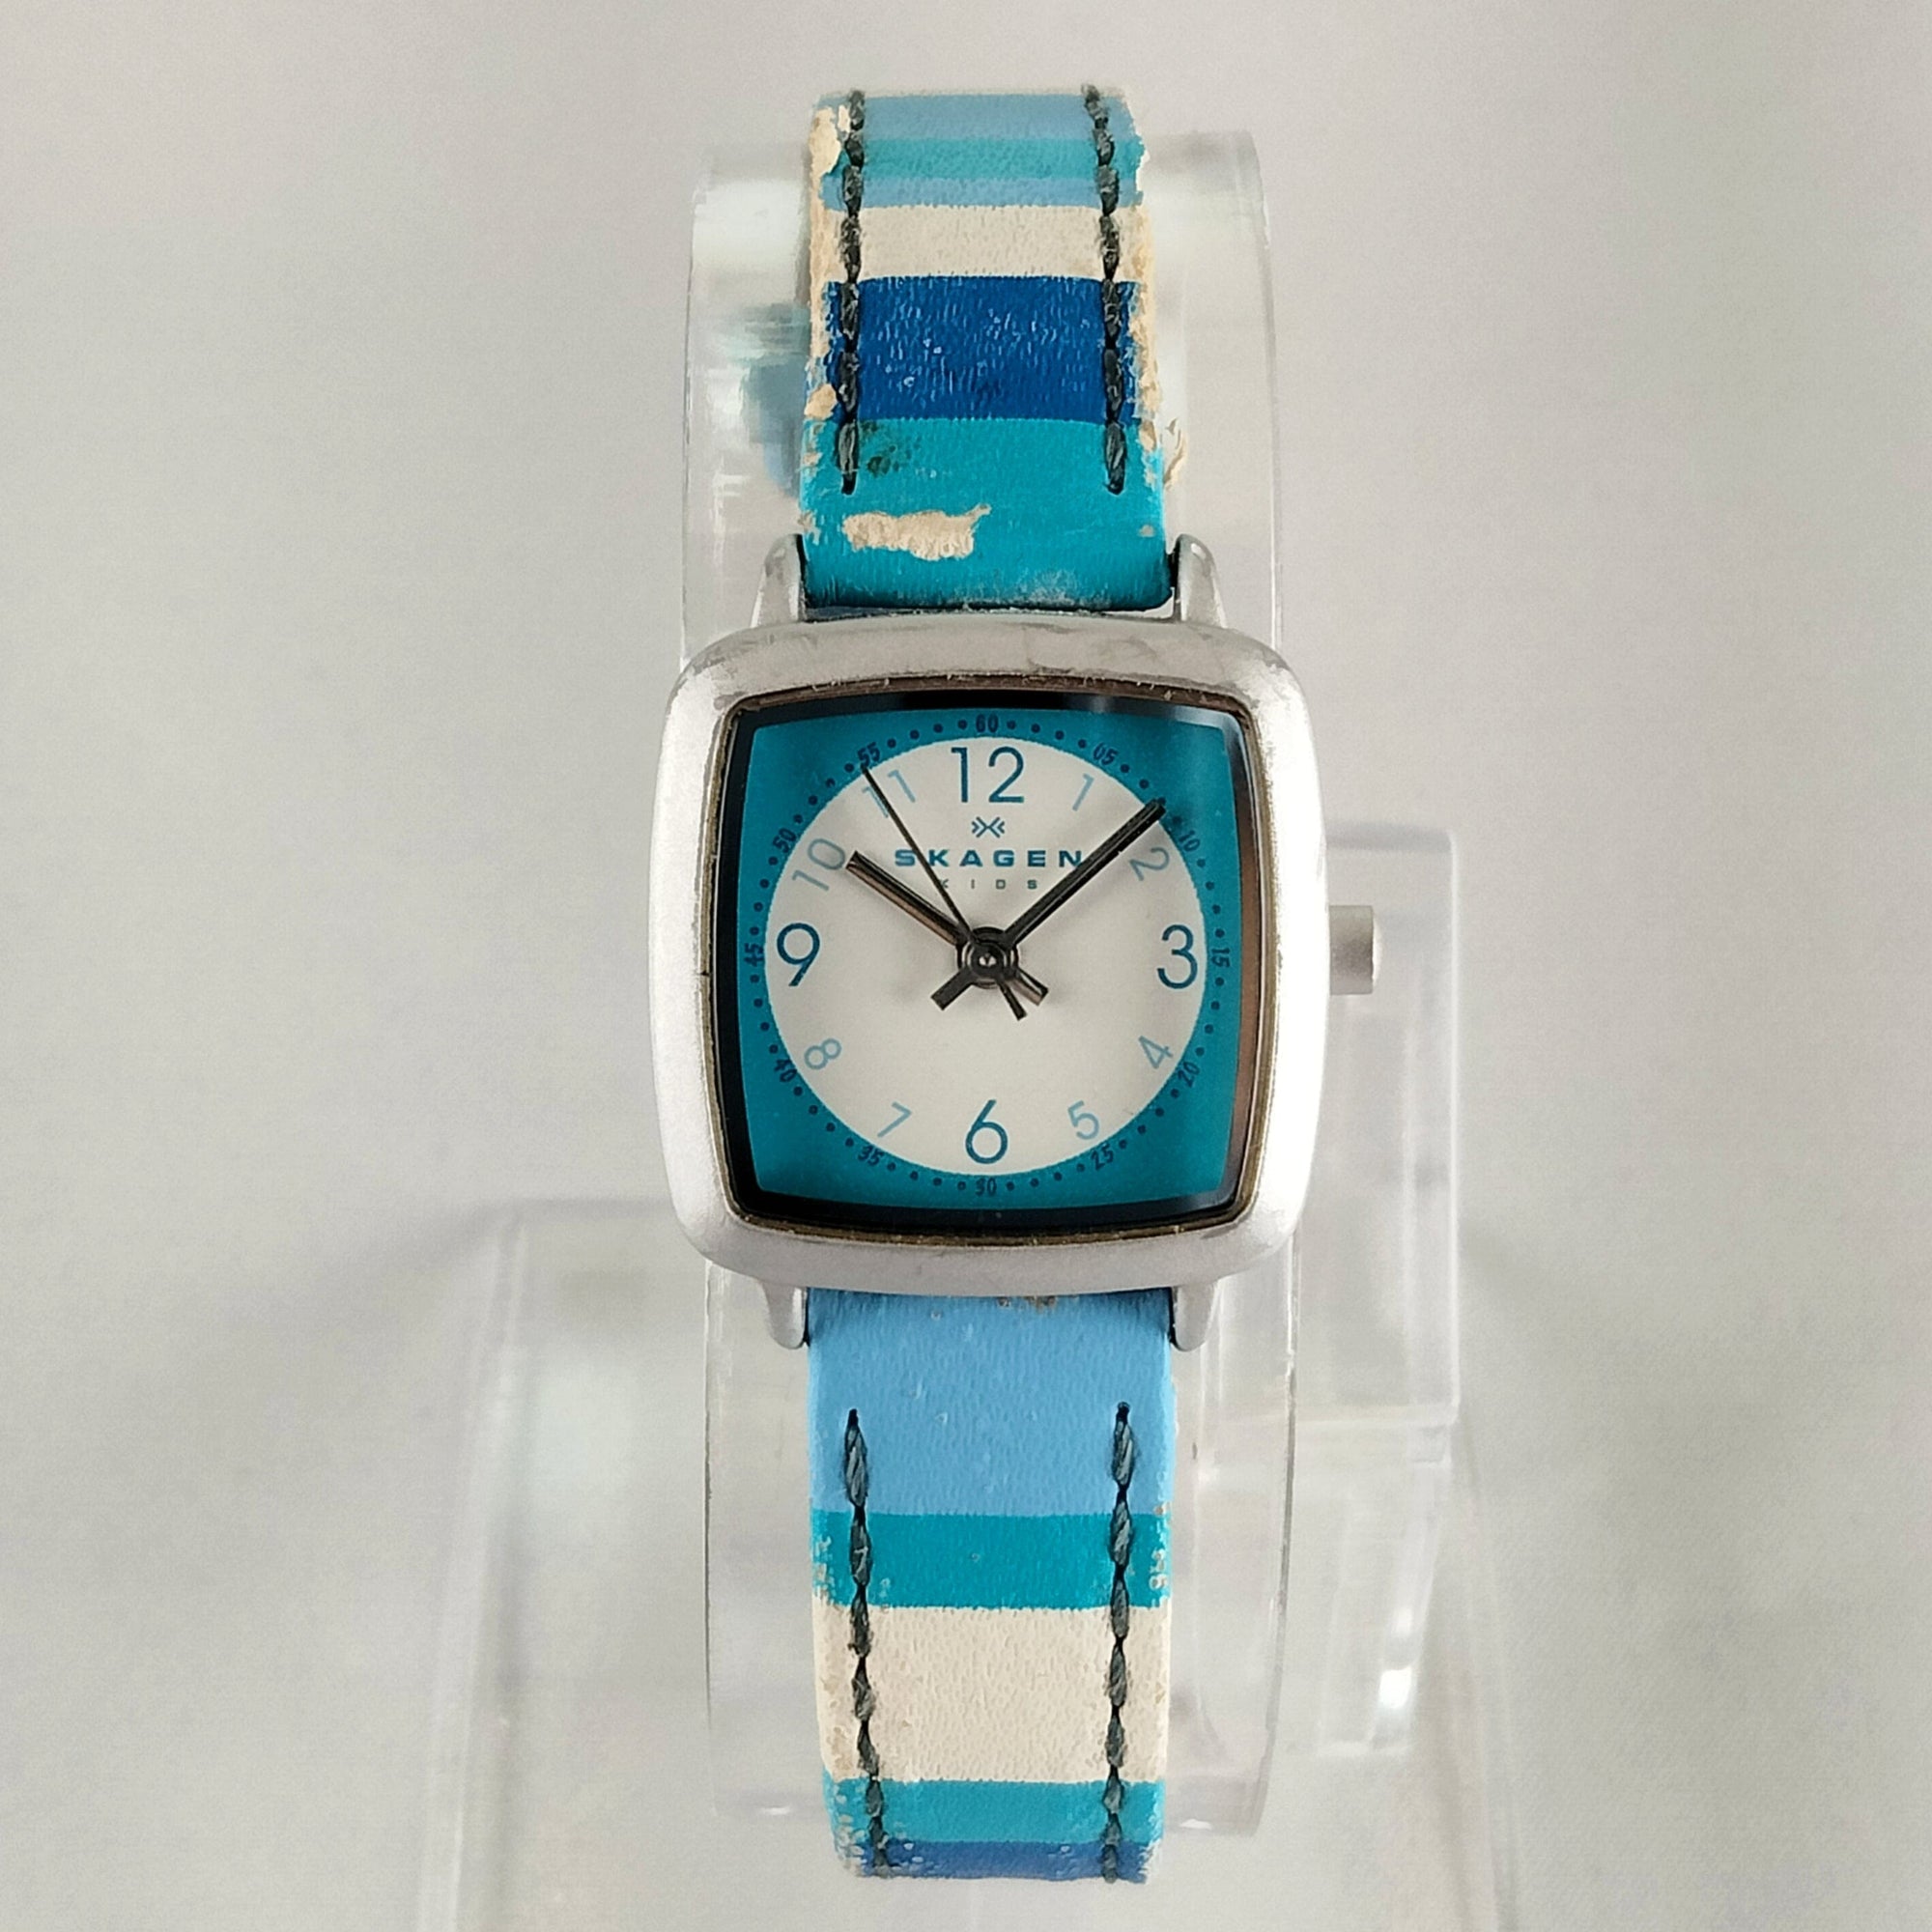 I Like Mikes Mid Century Modern Watches Skagen Women's Stainless Steel Watch, Blue and White Dial, Blue Striped Leather Strap